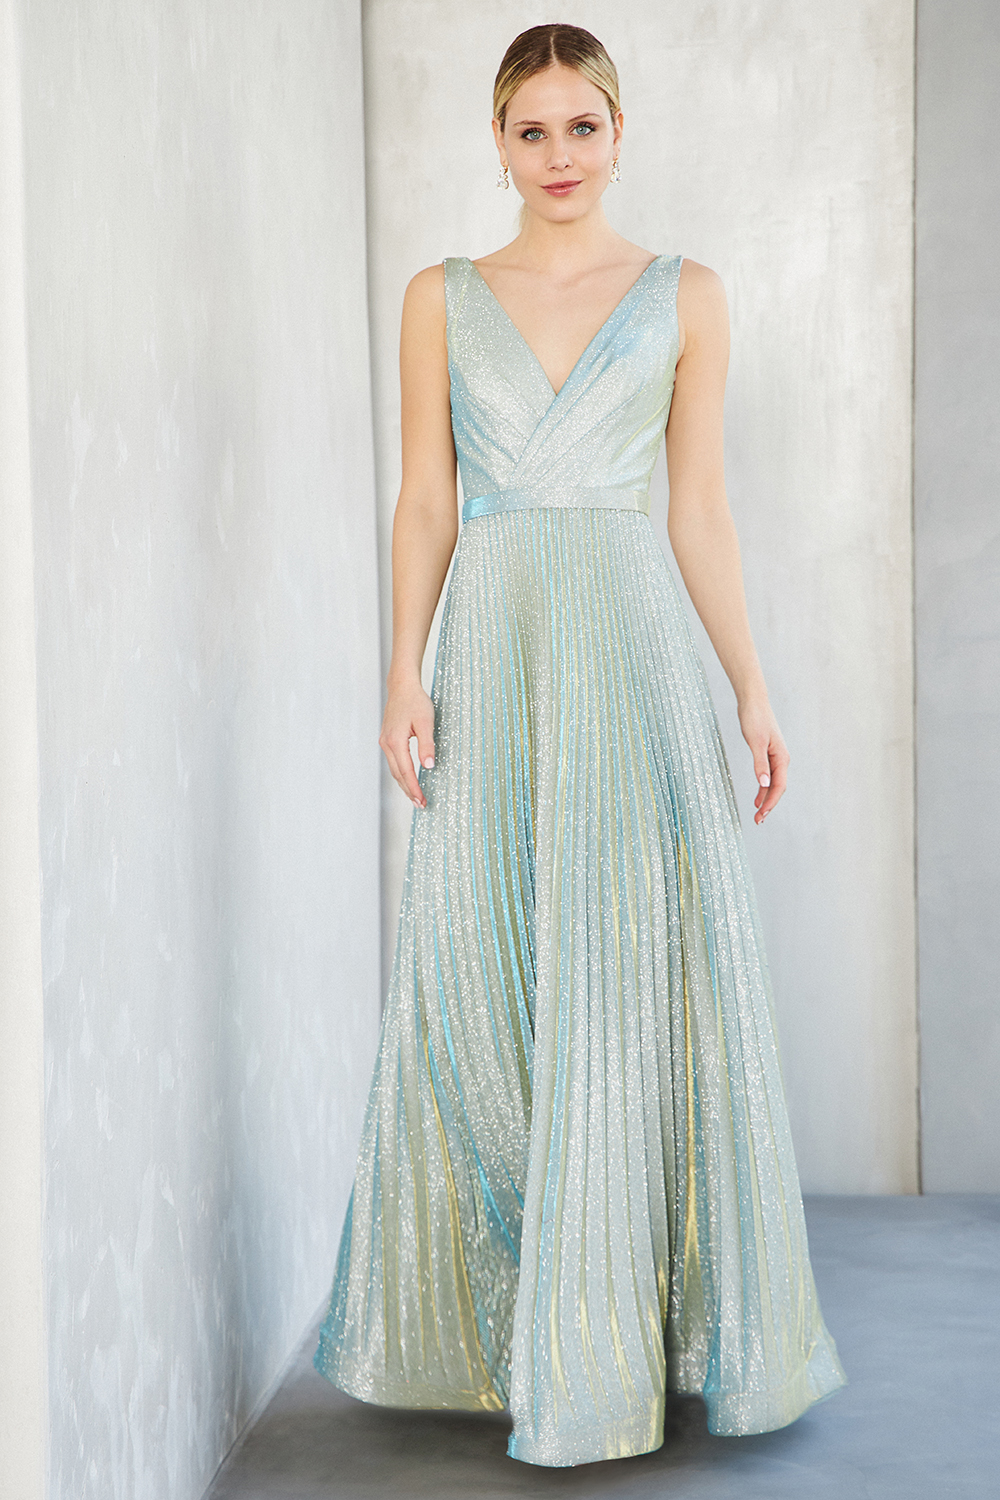 Classic Dresses / Long cocktail pleated dress with shining fabric and wide straps